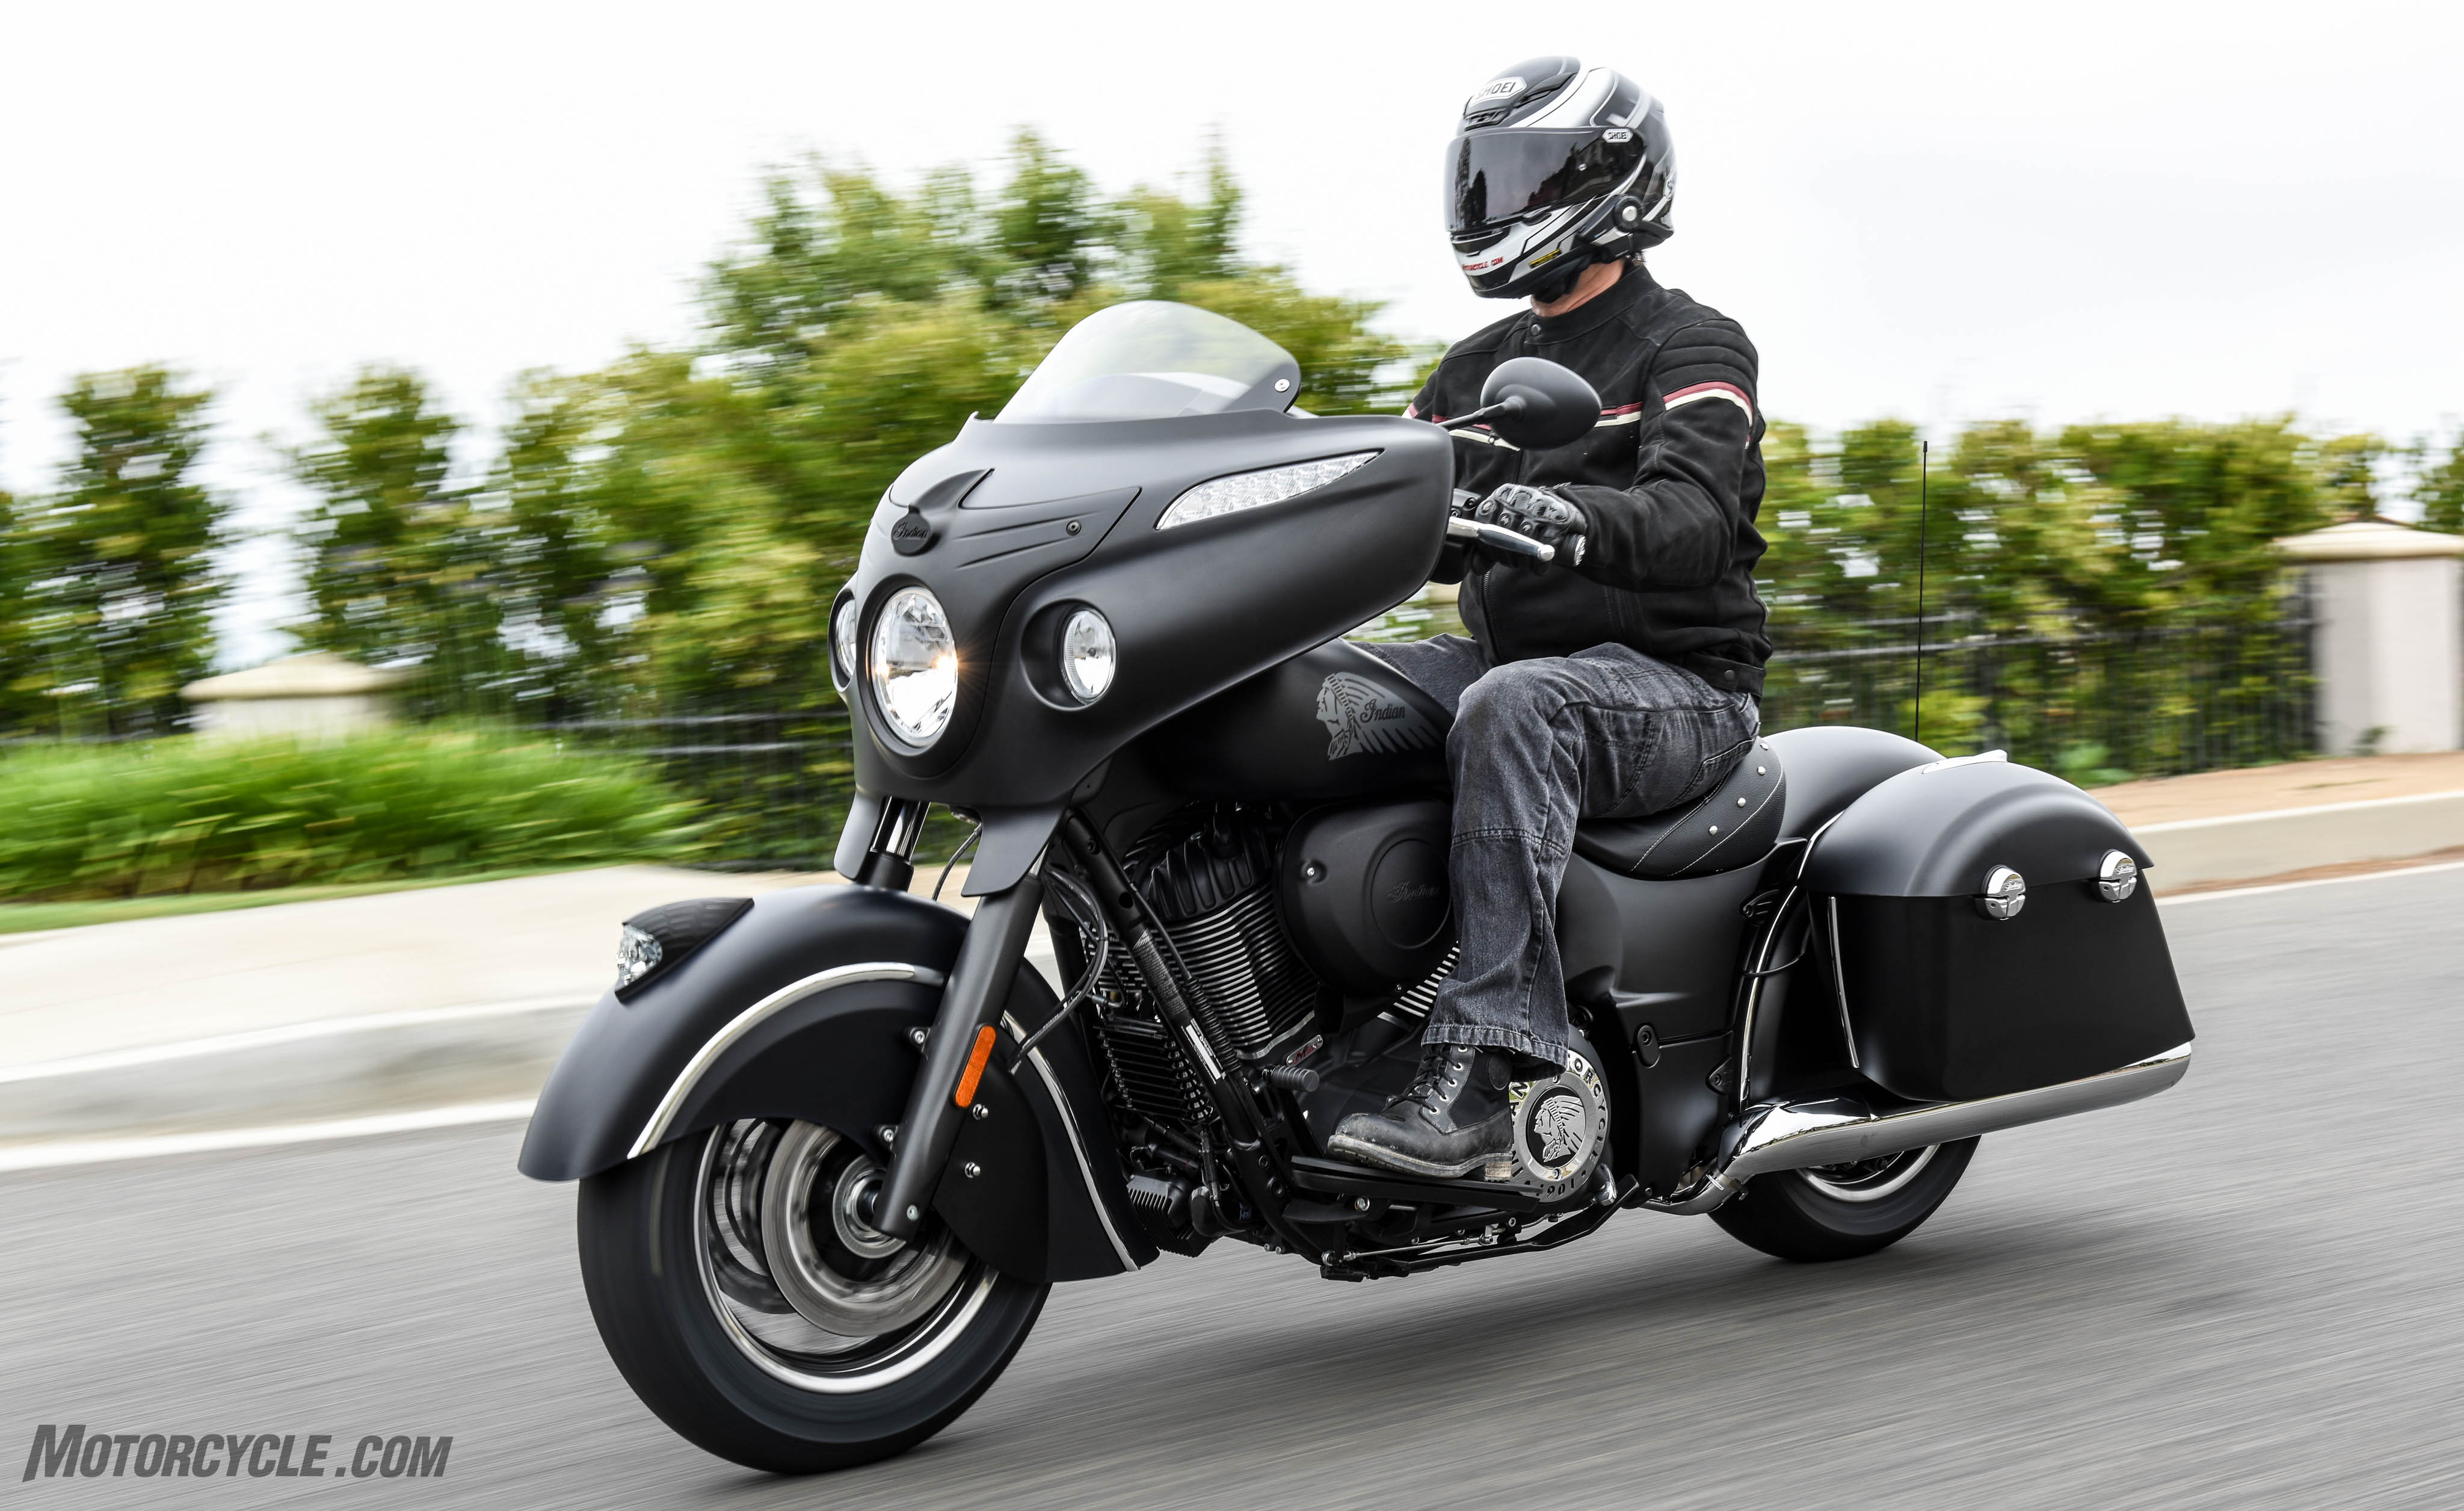 Indian Chieftain Dark Horse Hd Wallpapers, Desktop - Indian Chieftain Black Horse - HD Wallpaper 